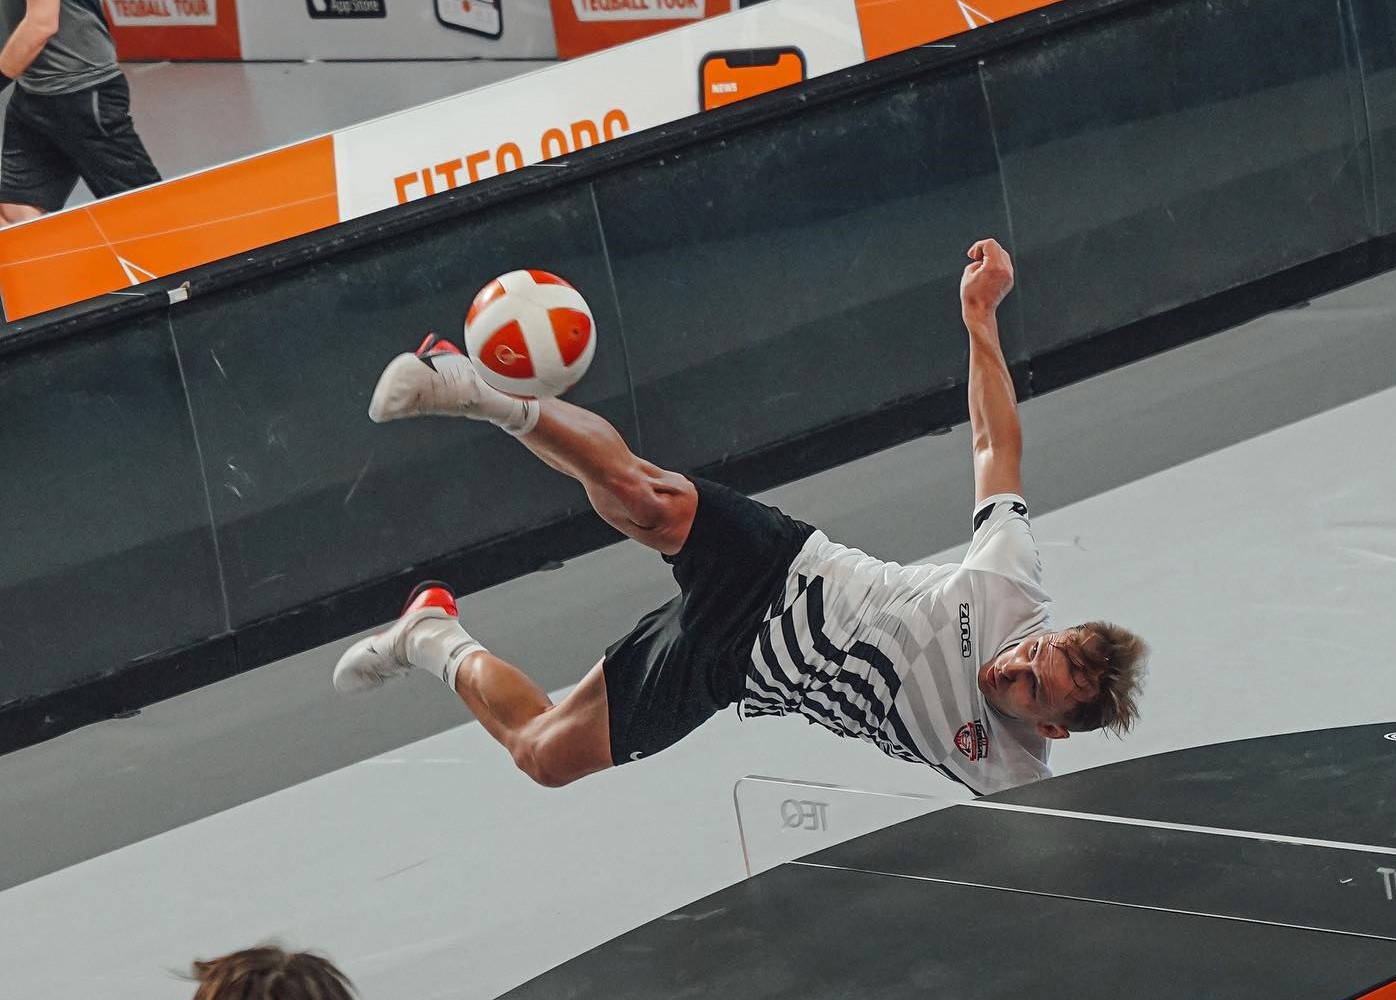 Teqball. “The Polish national team can win medals in every competition”